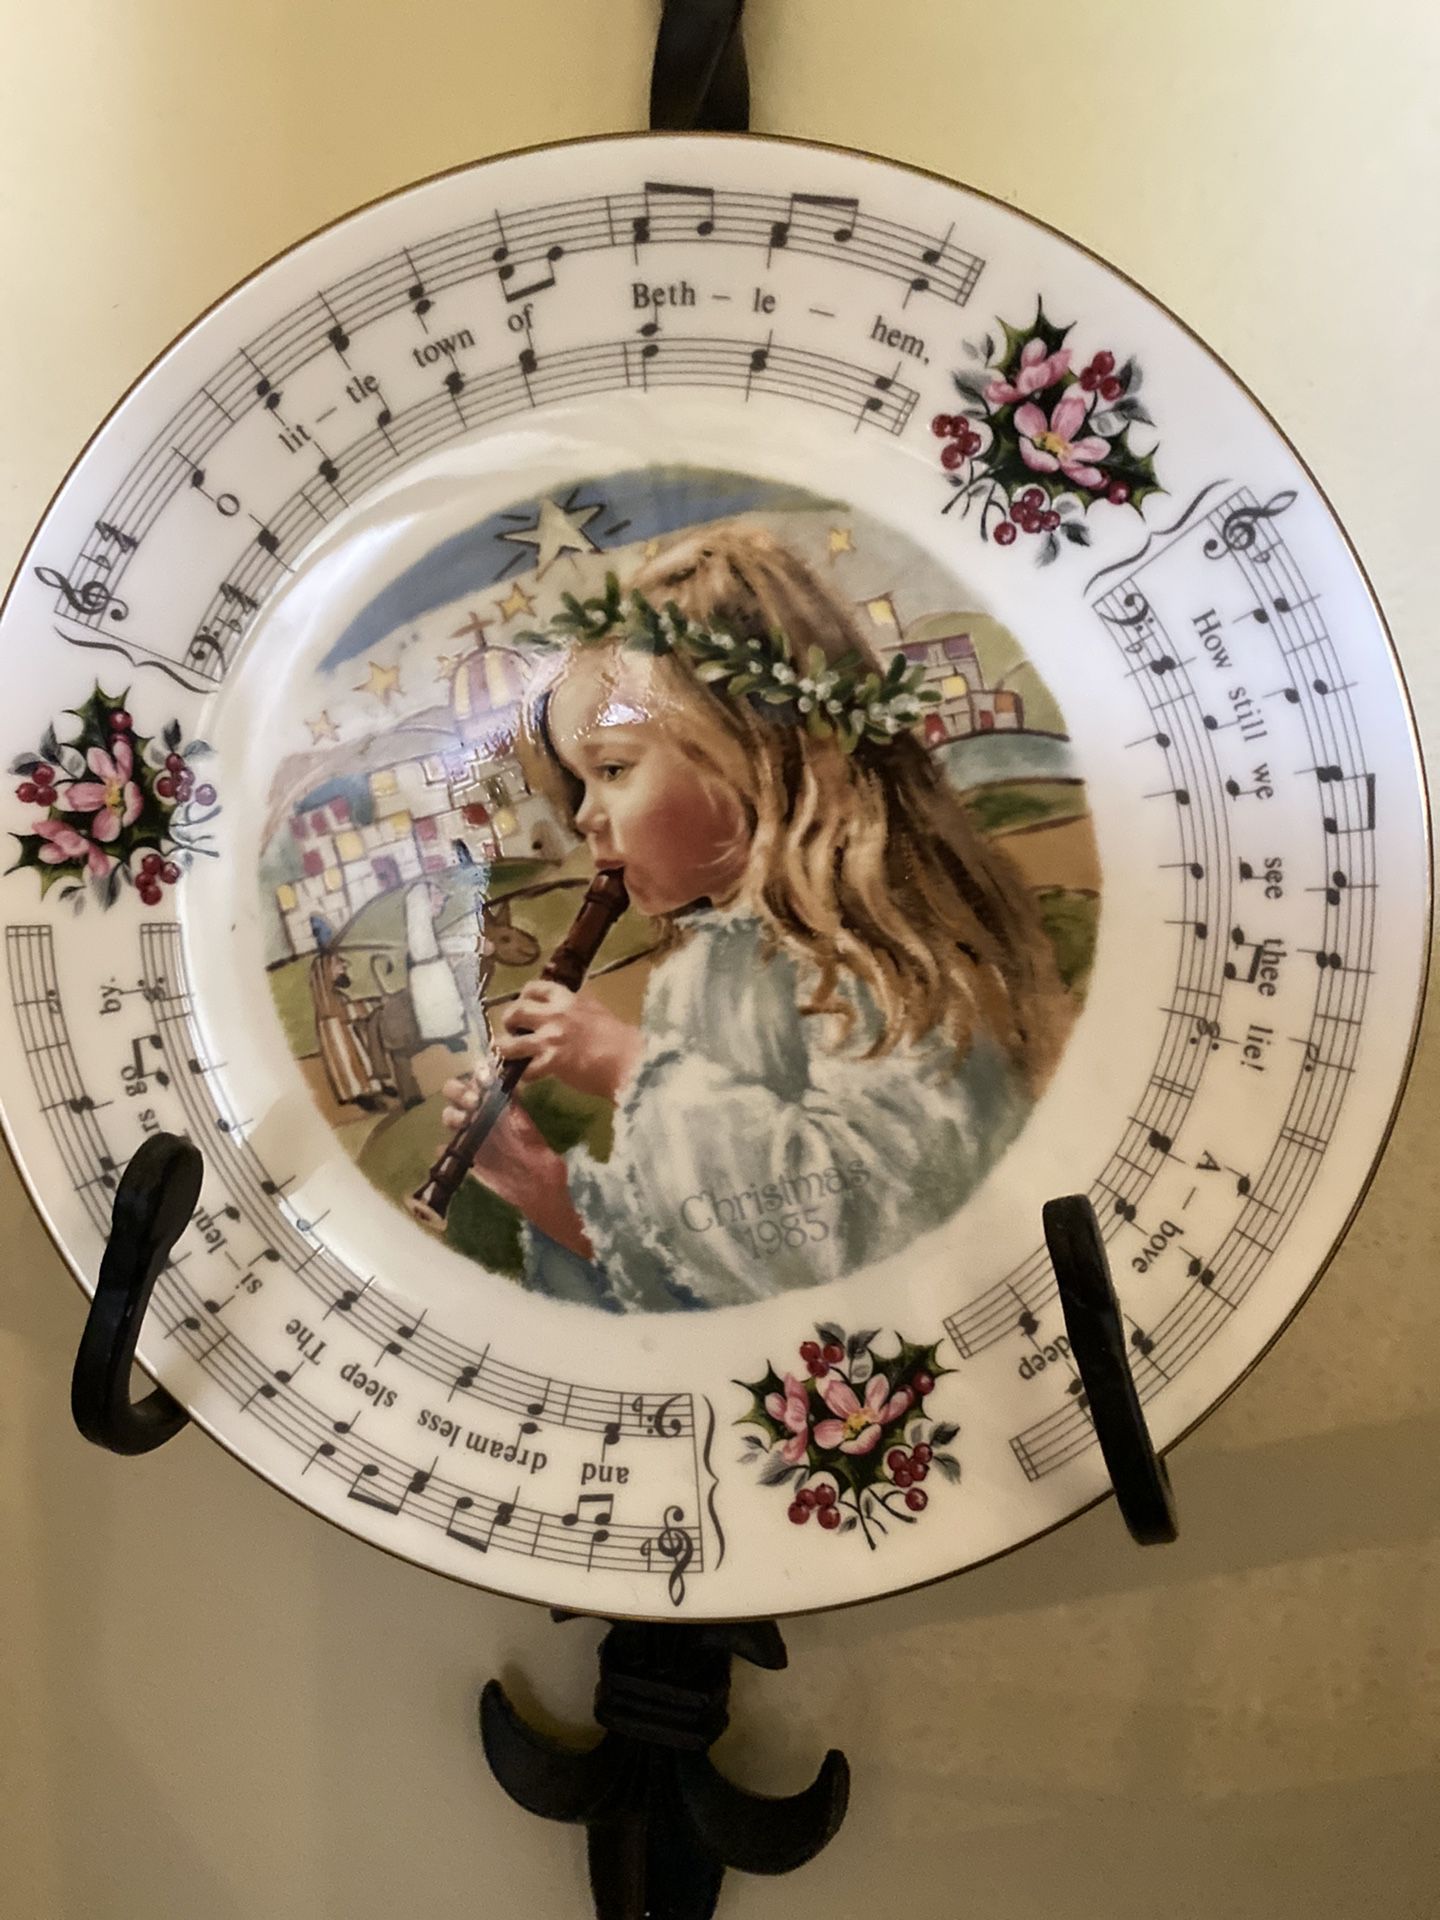 Christmas Carols   Royal Doulton Plate Song On Back Of Plate   O Little Town Of Bethlehem    No Shipping On This Item Only Local Pick Up